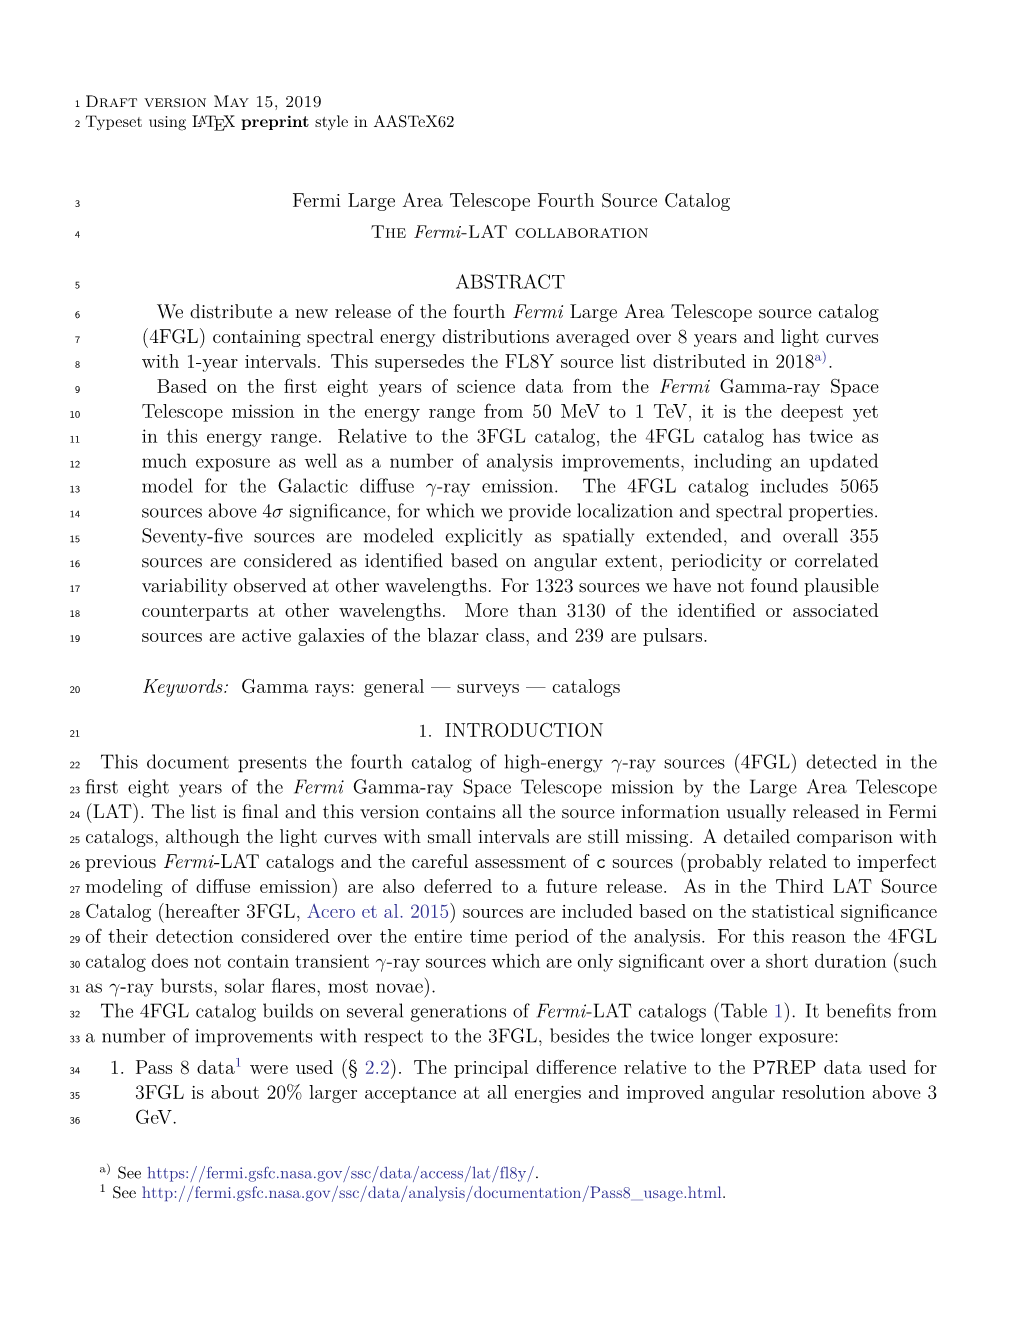 Fermi Large Area Telescope Fourth Source Catalog ABSTRACT We Distribute a New Release of the Fourth Fermi Large Area Telescope